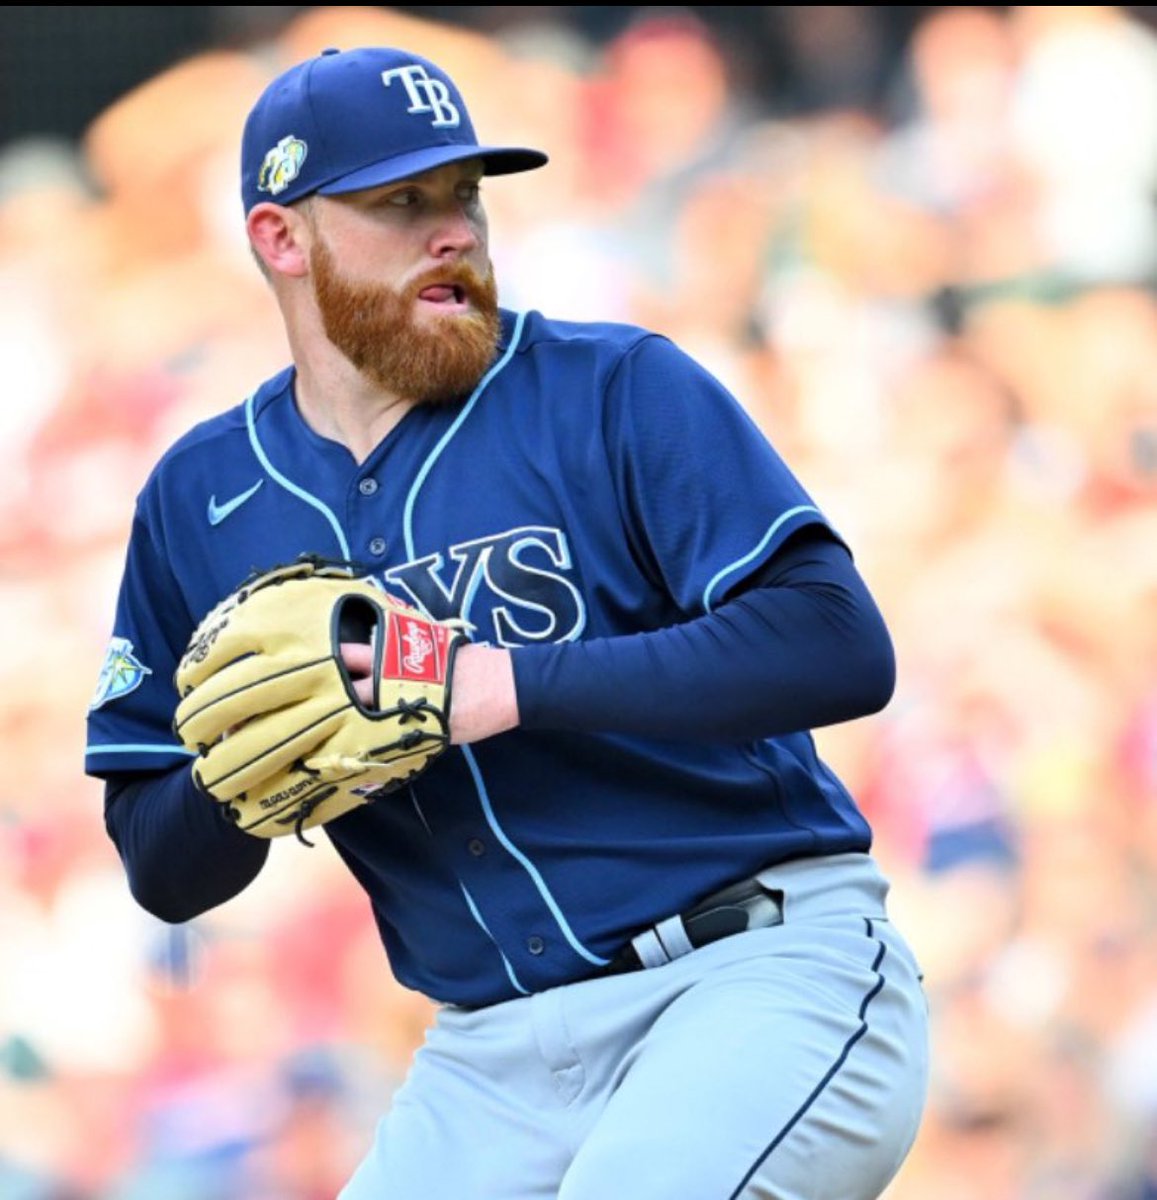 Zack Littell with yet again another solid outing for the #Rays 

5.2 IP, 4 H, 2 ER, 2 BB, 3 Ks, 8 Whiffs

Season ERA: 3.02

Velo Spin/Spin Rates Today📈🔥

Slider: +1.0 MPH/+37 RPMs
4-Seam: +0.3 MPH/+51 RPMs
Splitter: +1.2 MPH/+61 RPMs
Sinker: +46 RPMs
Sweeper: +94 RPMs

#MLB